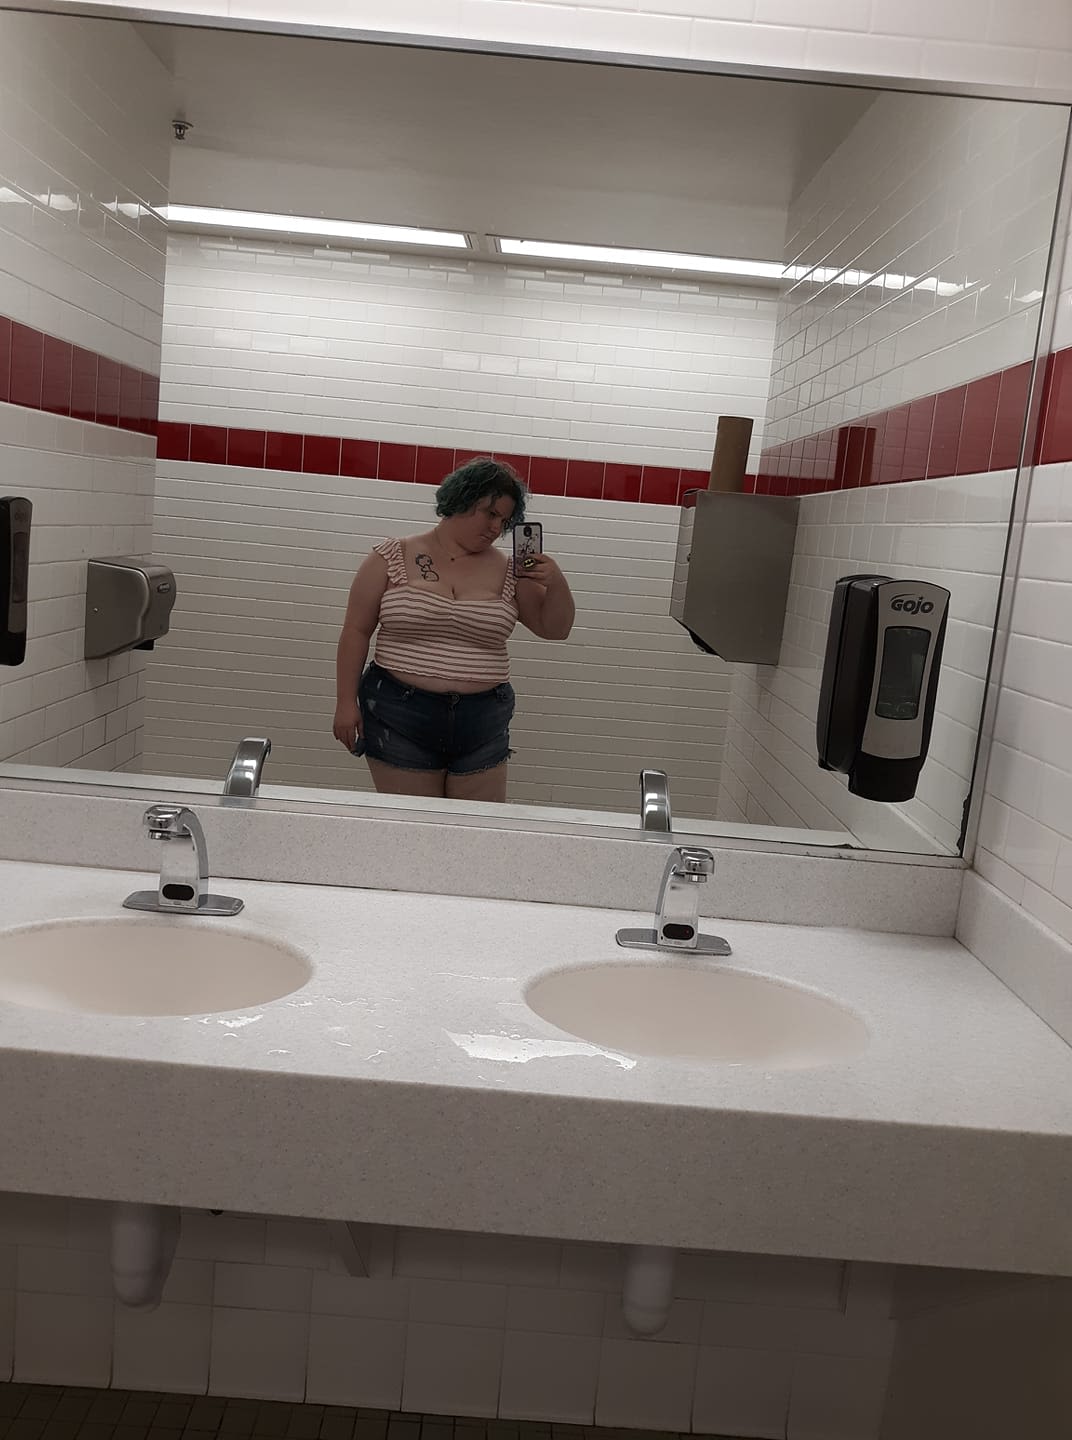 Mother says she was forced to leave Golden Corral for wearing crop top